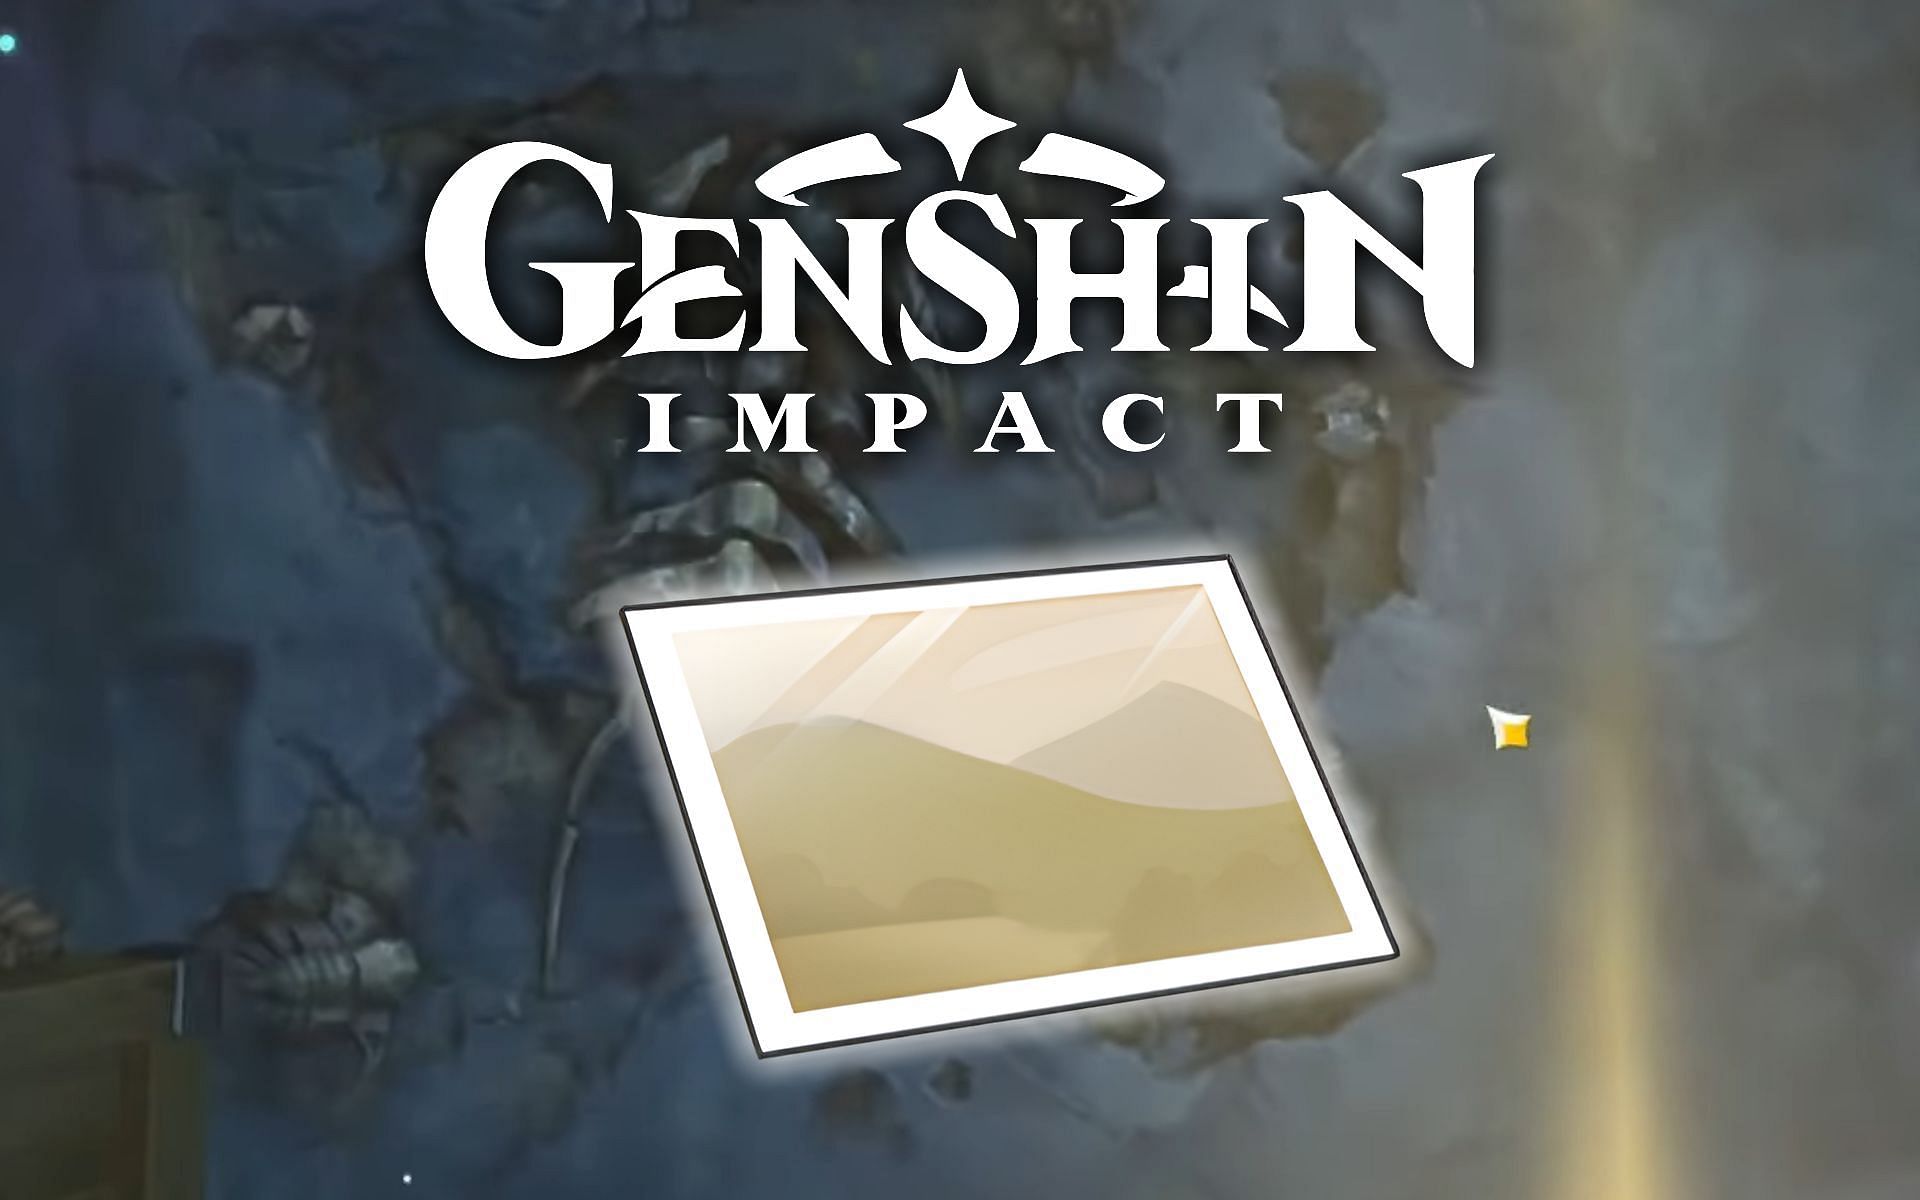 Genshin Impact players will take several photos in this quest (Image via miHoYo)